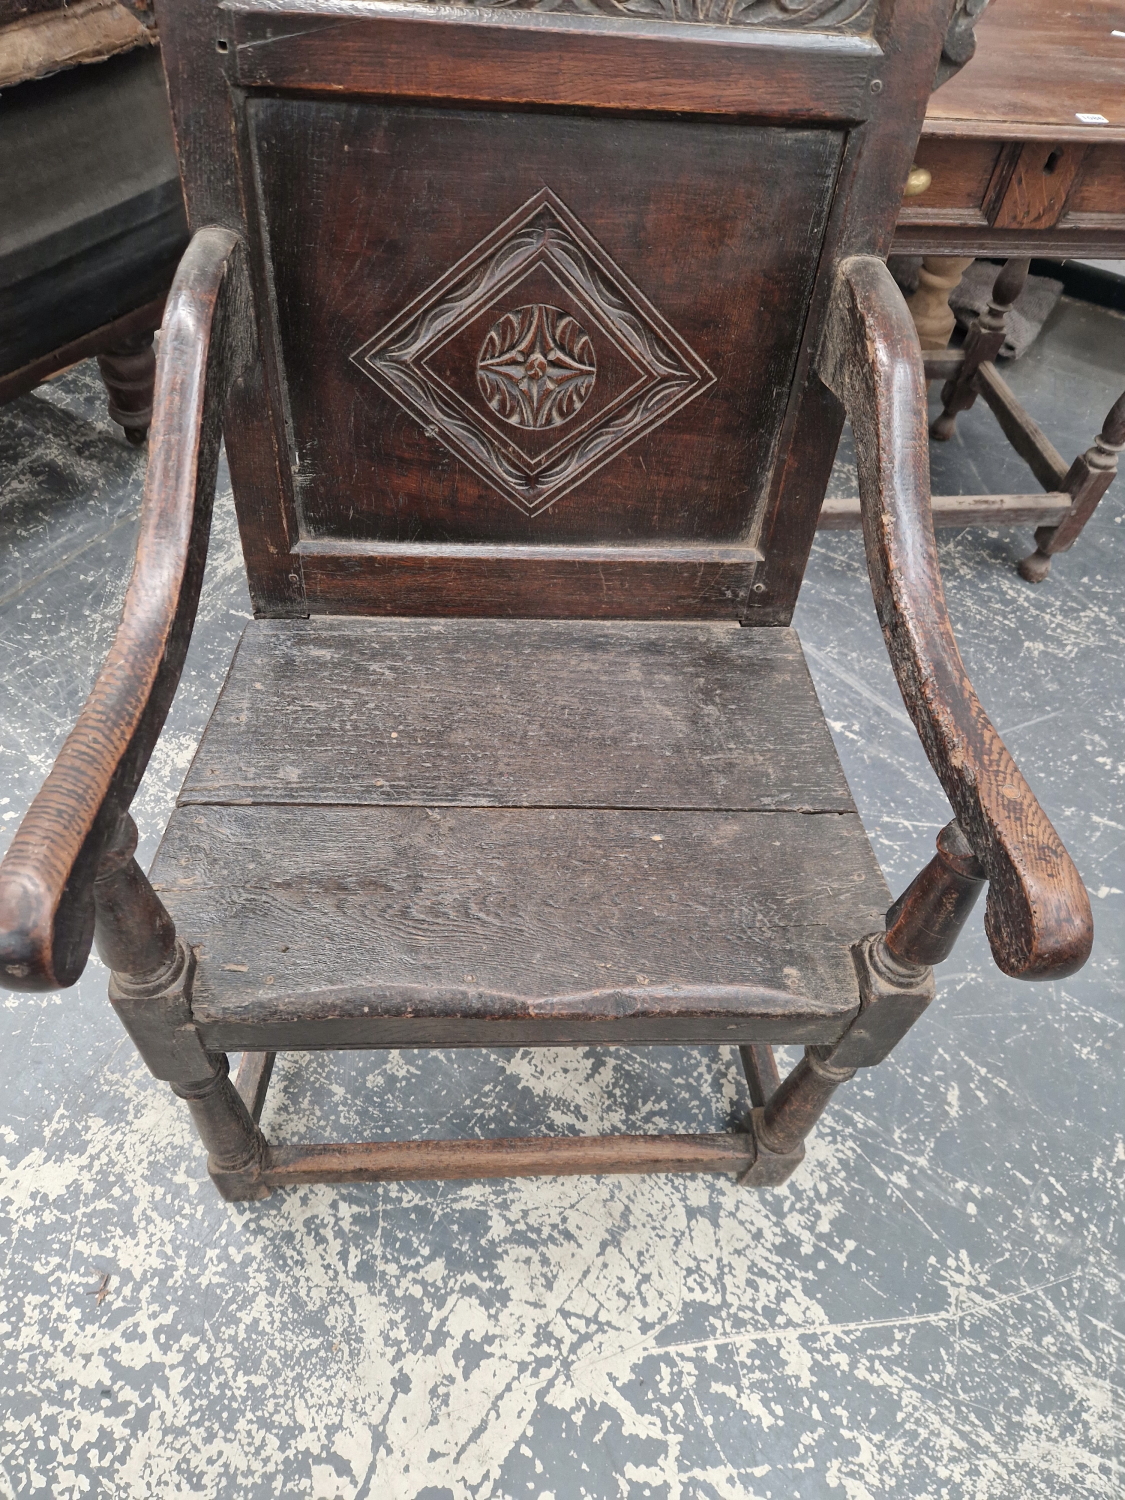 AN EARLY 18TH CENTURY WAINSCOTT CHAIR. - Image 4 of 6